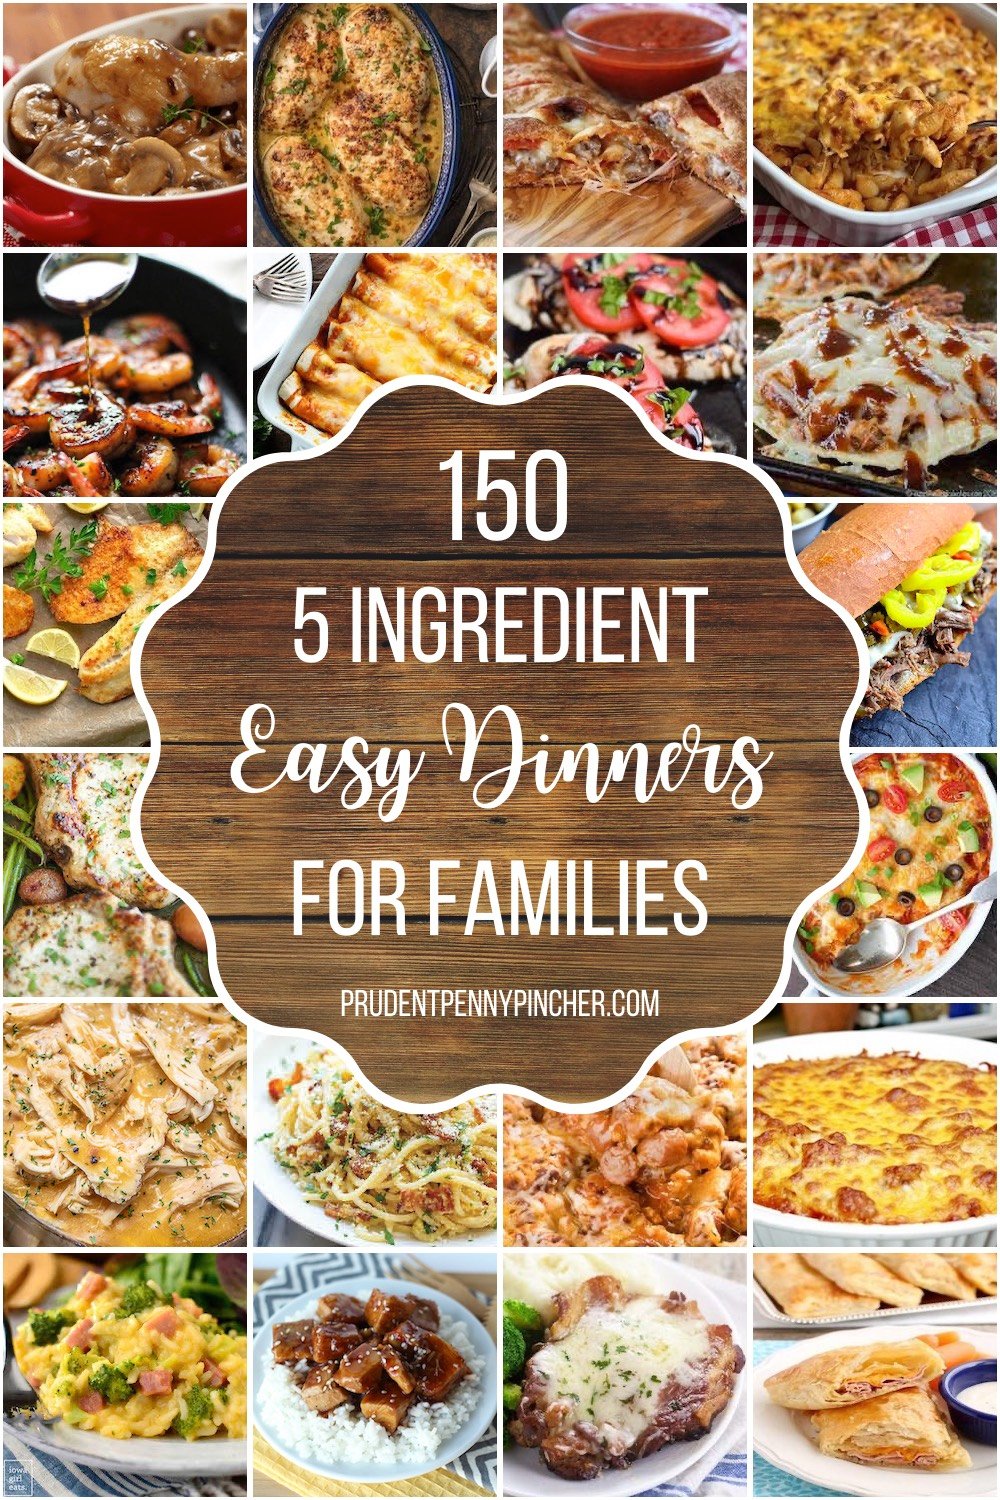 5 ingredient easy dinners for families